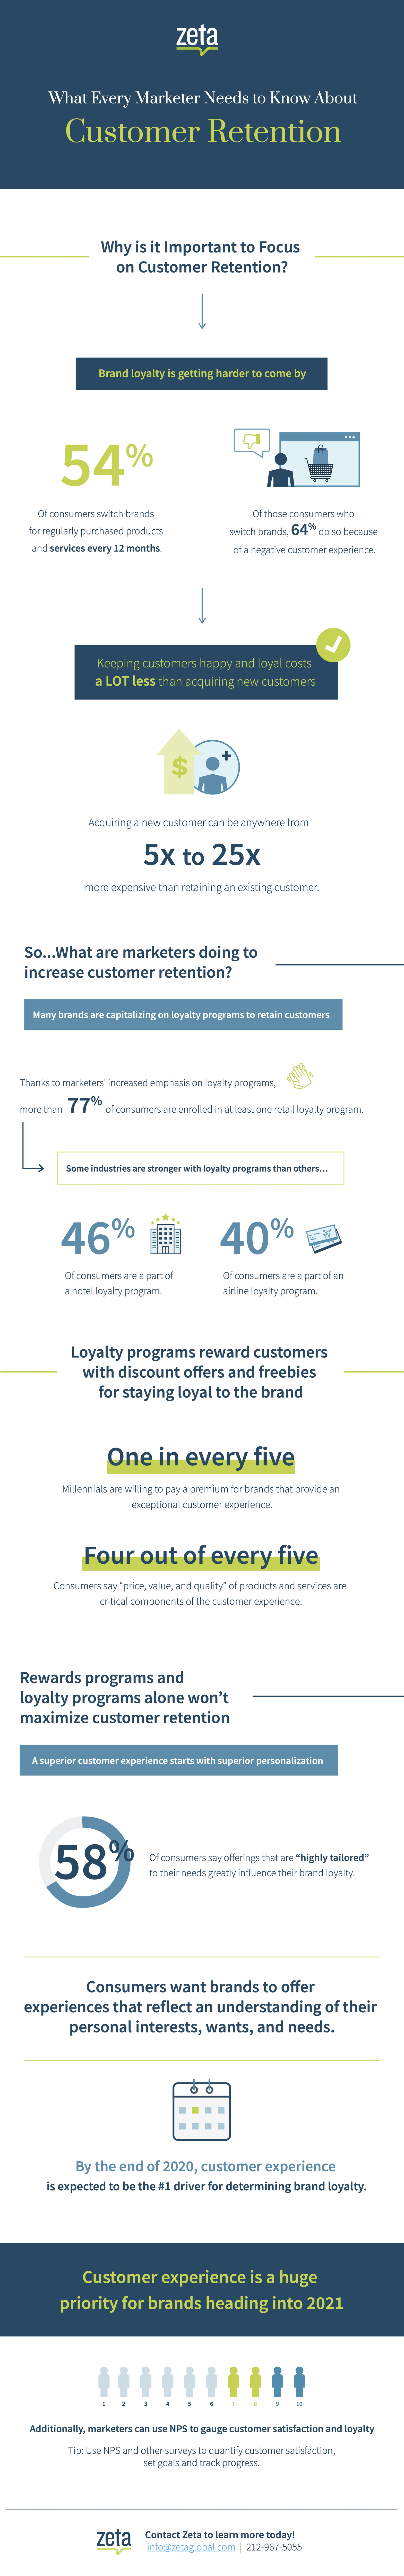 infographic on what every marketer needs to know about customer retention